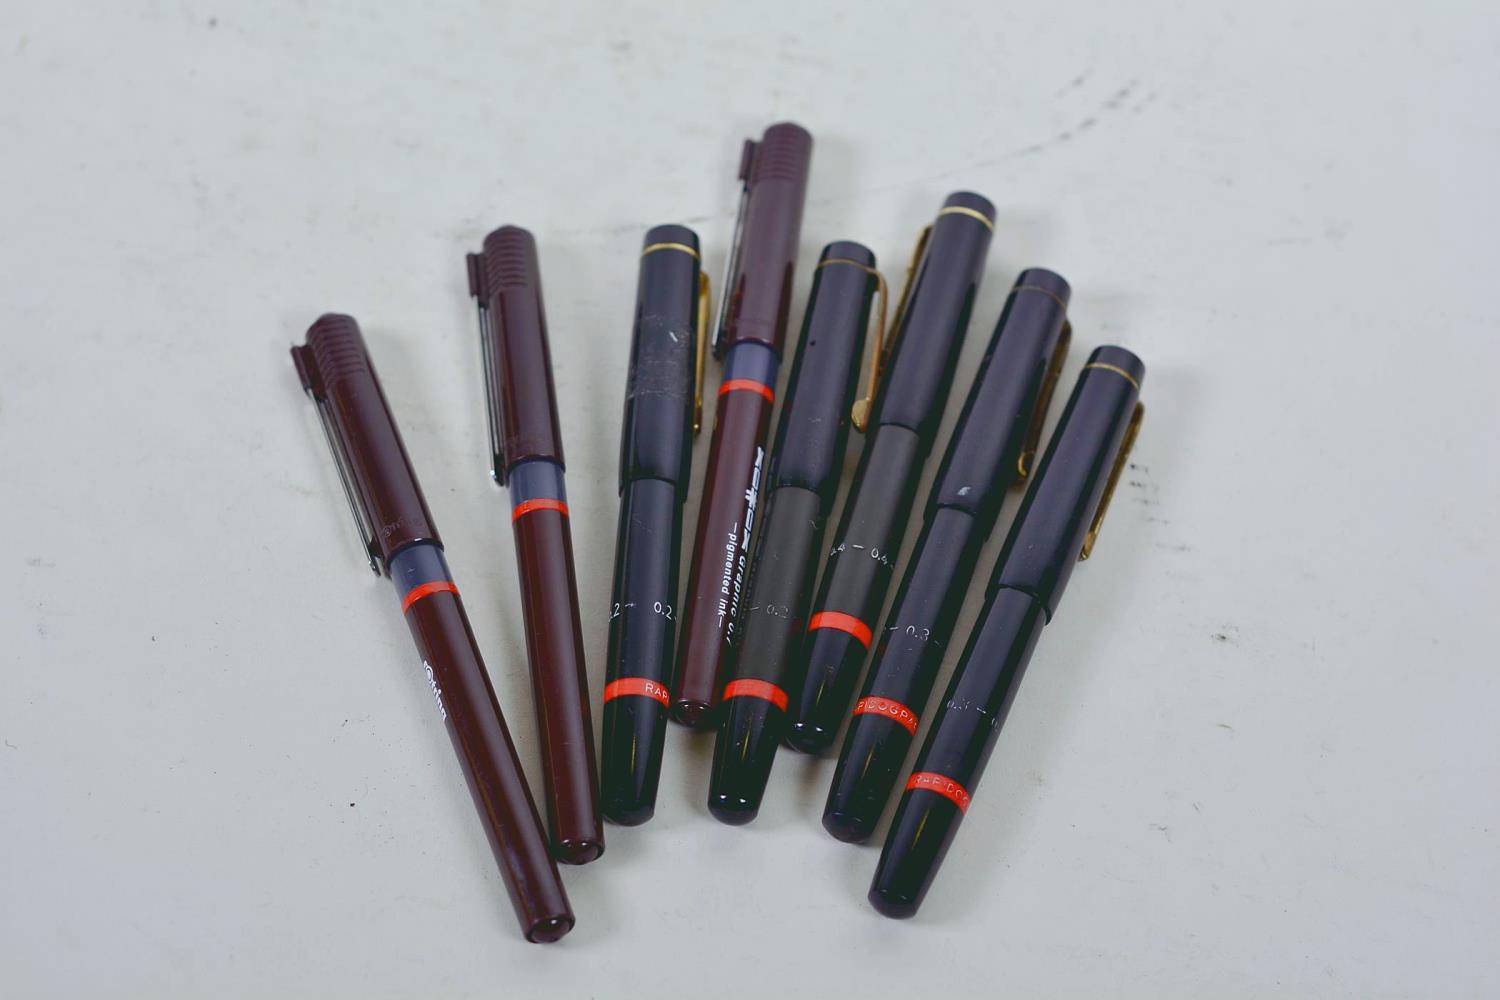 A collection of eight Rotring calligraphy pens together with an ink pen with glass handle filled - Image 4 of 5